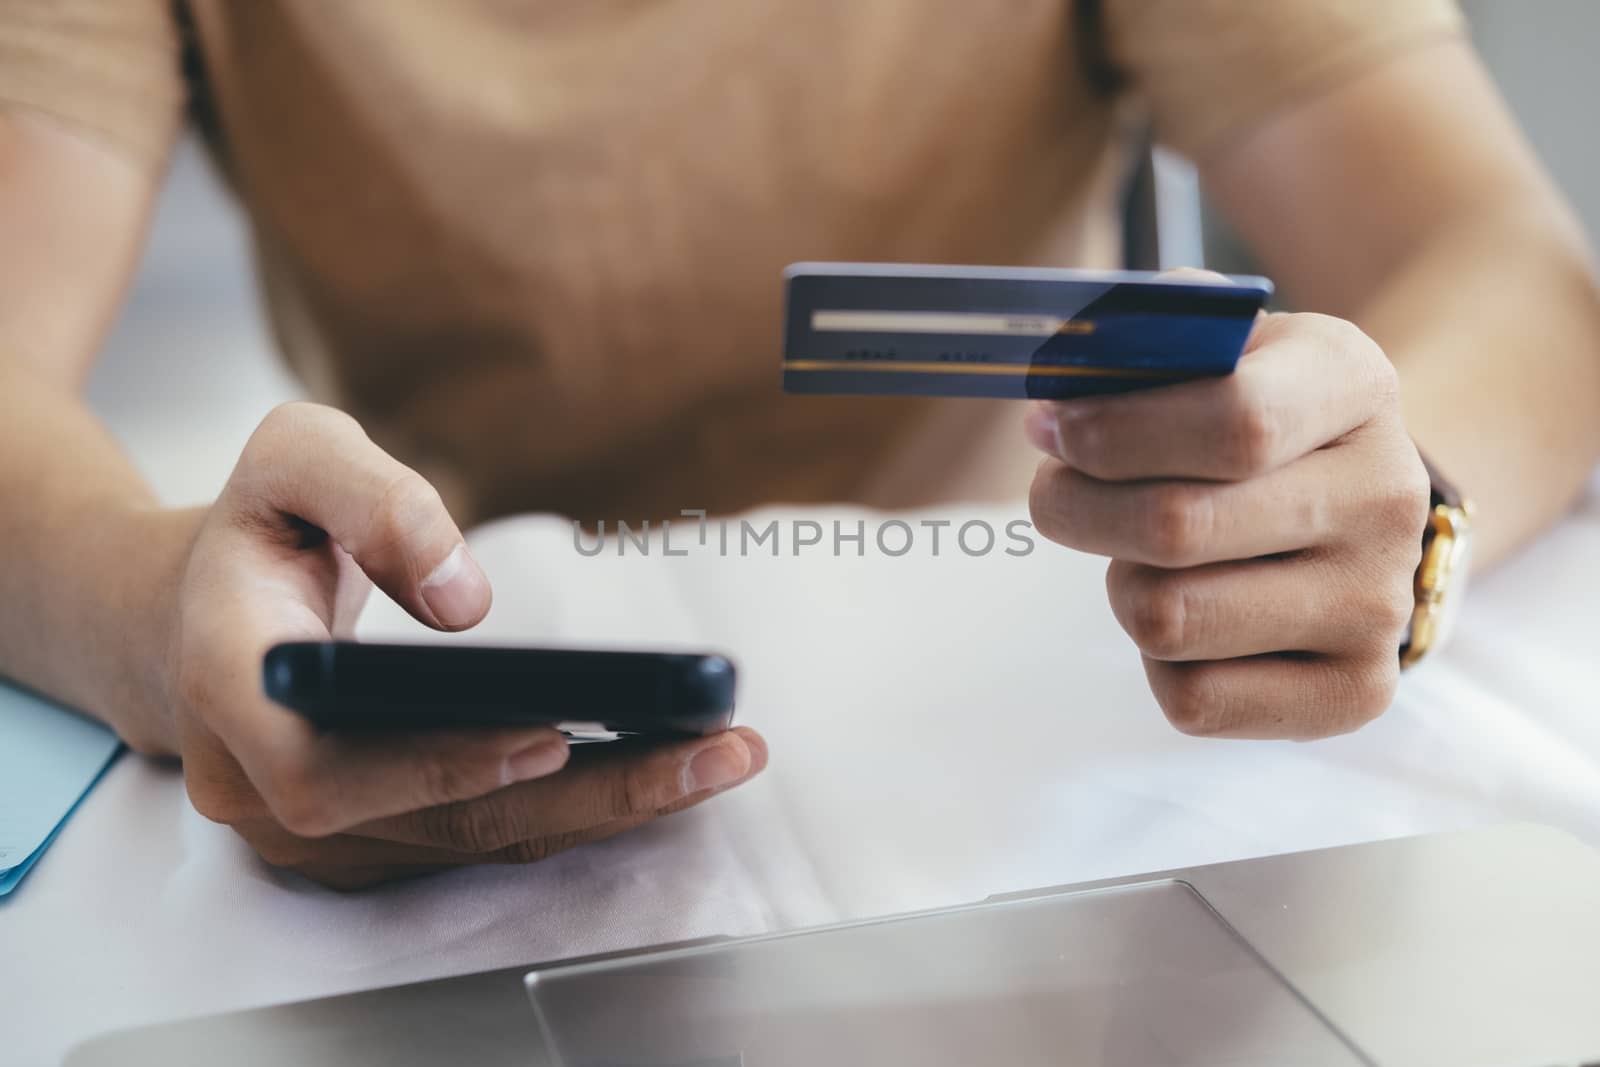 Online shopping and paying with credit card. Closeup hands holding credit card and using mobilephone and online shopping.